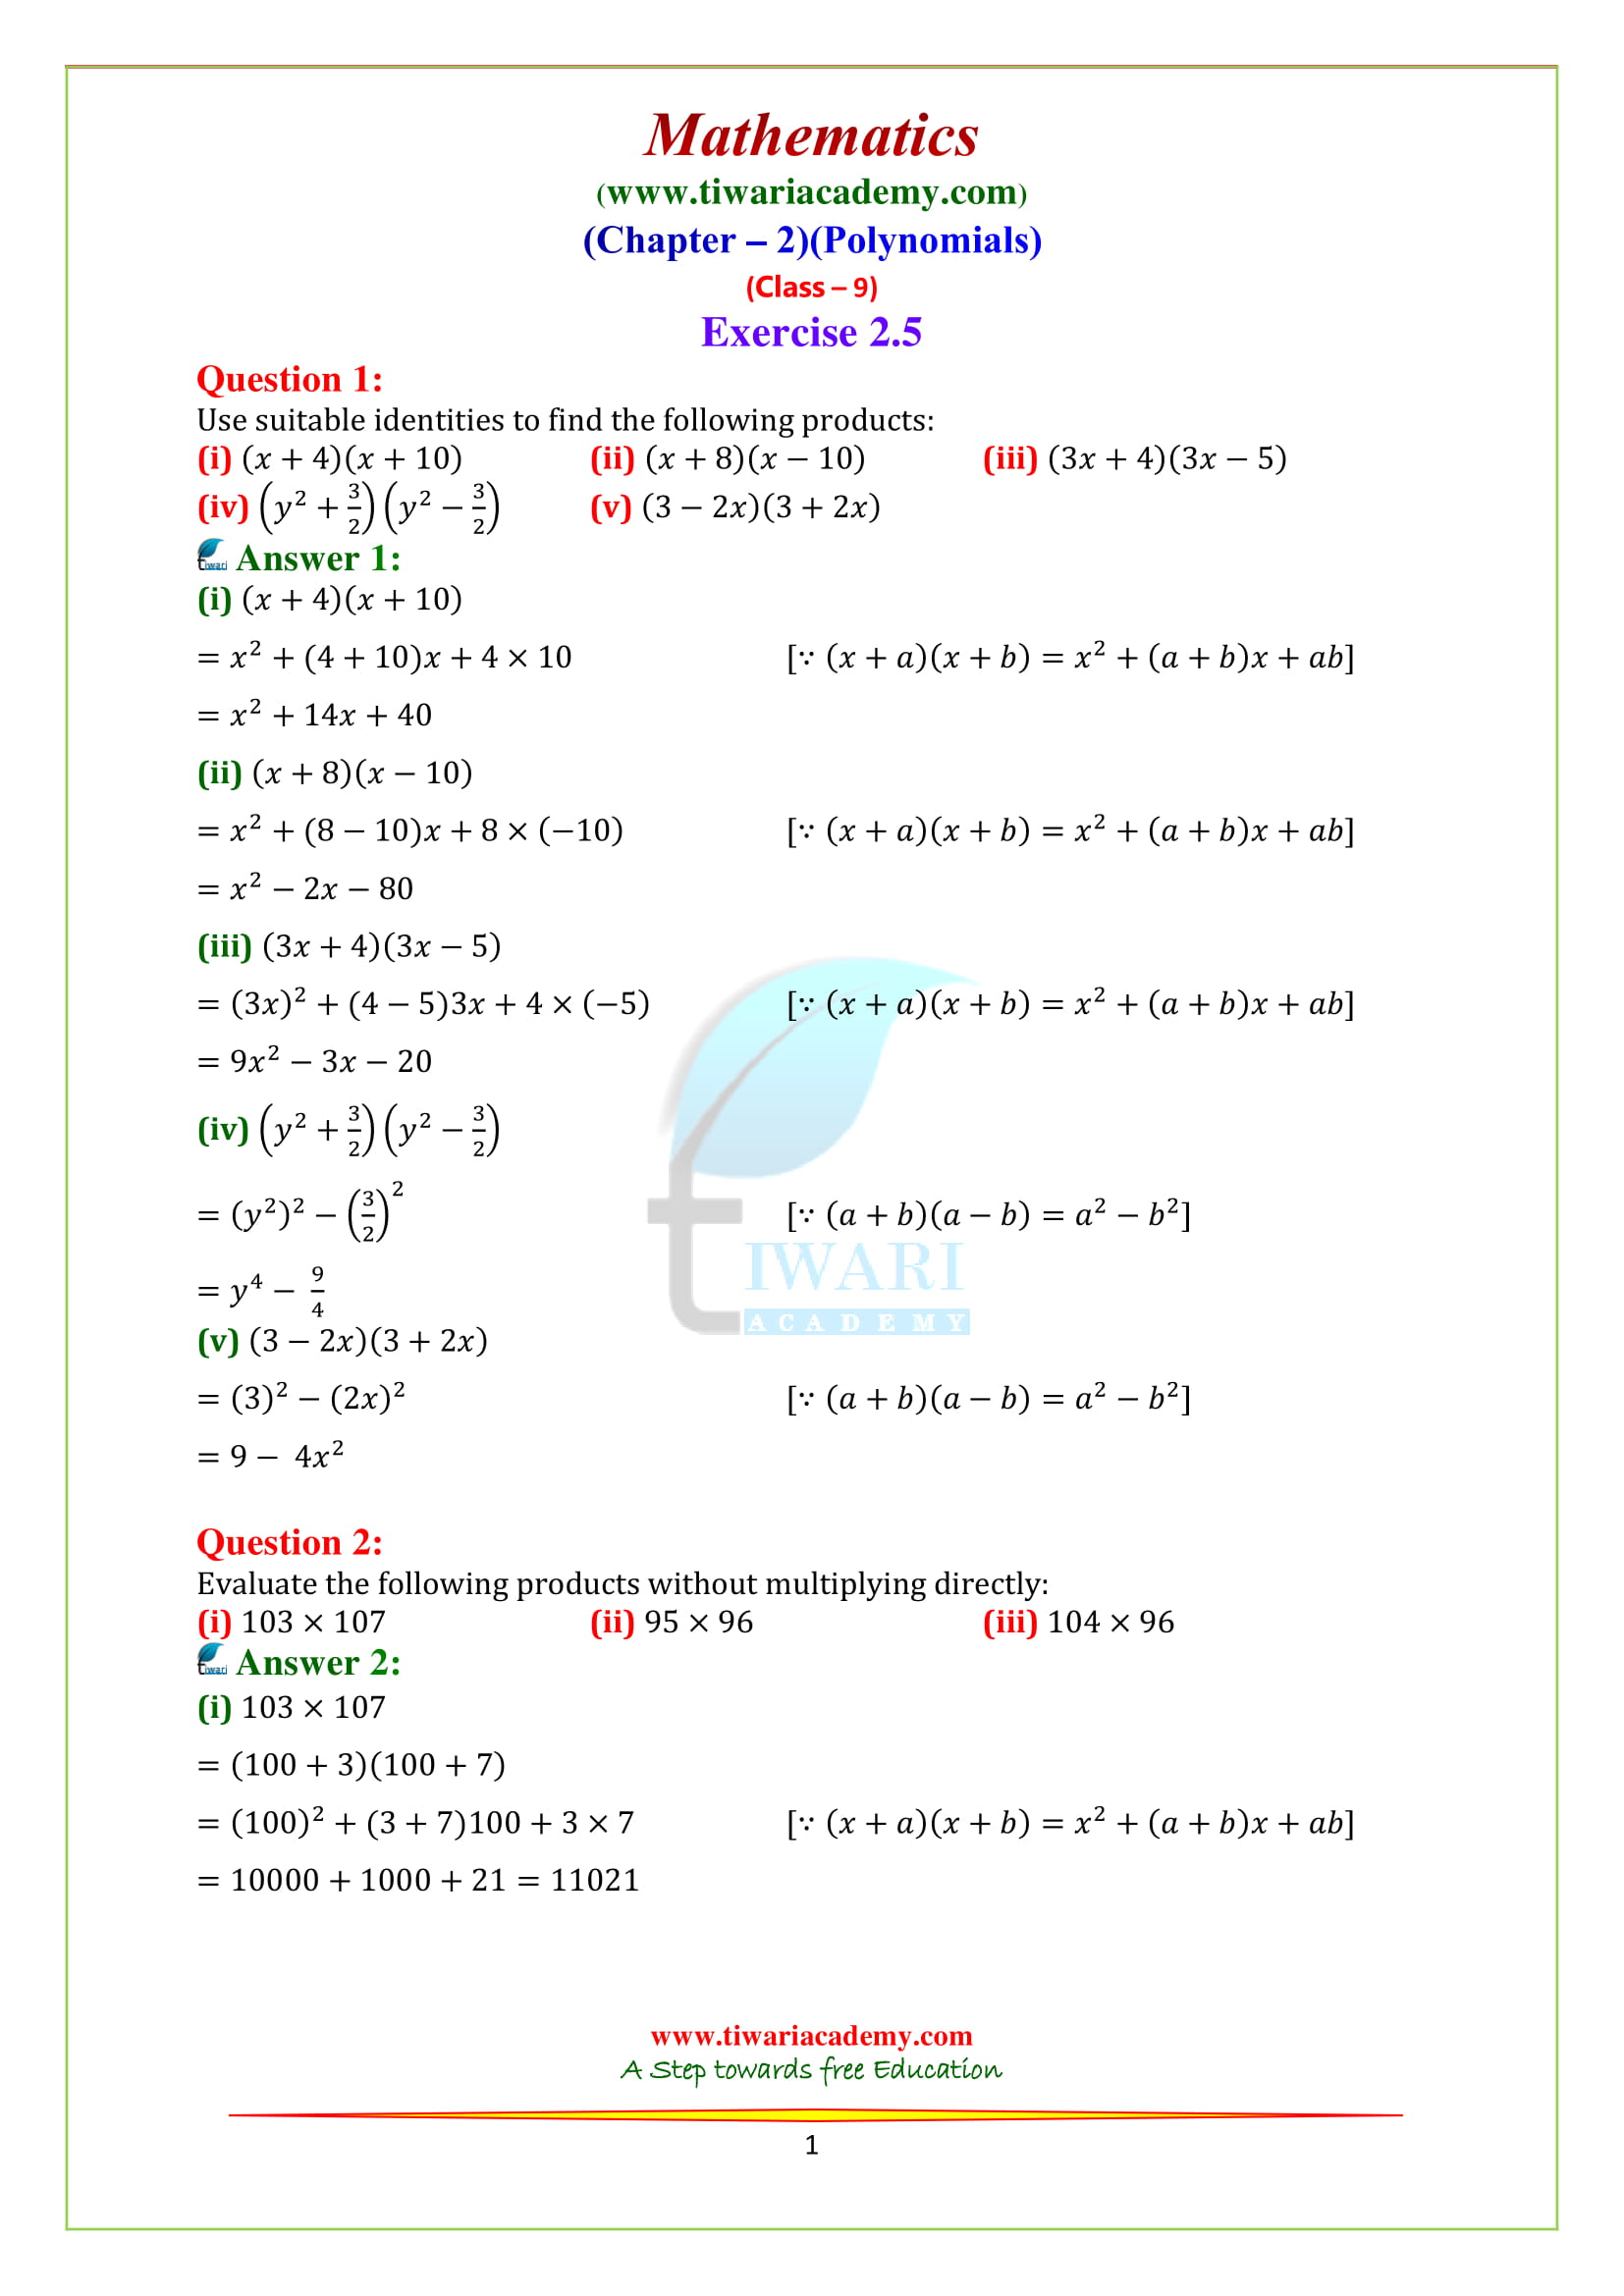 NCERT Solutions for class 9 Maths chapter 2 exercise 2.5 Polynomials